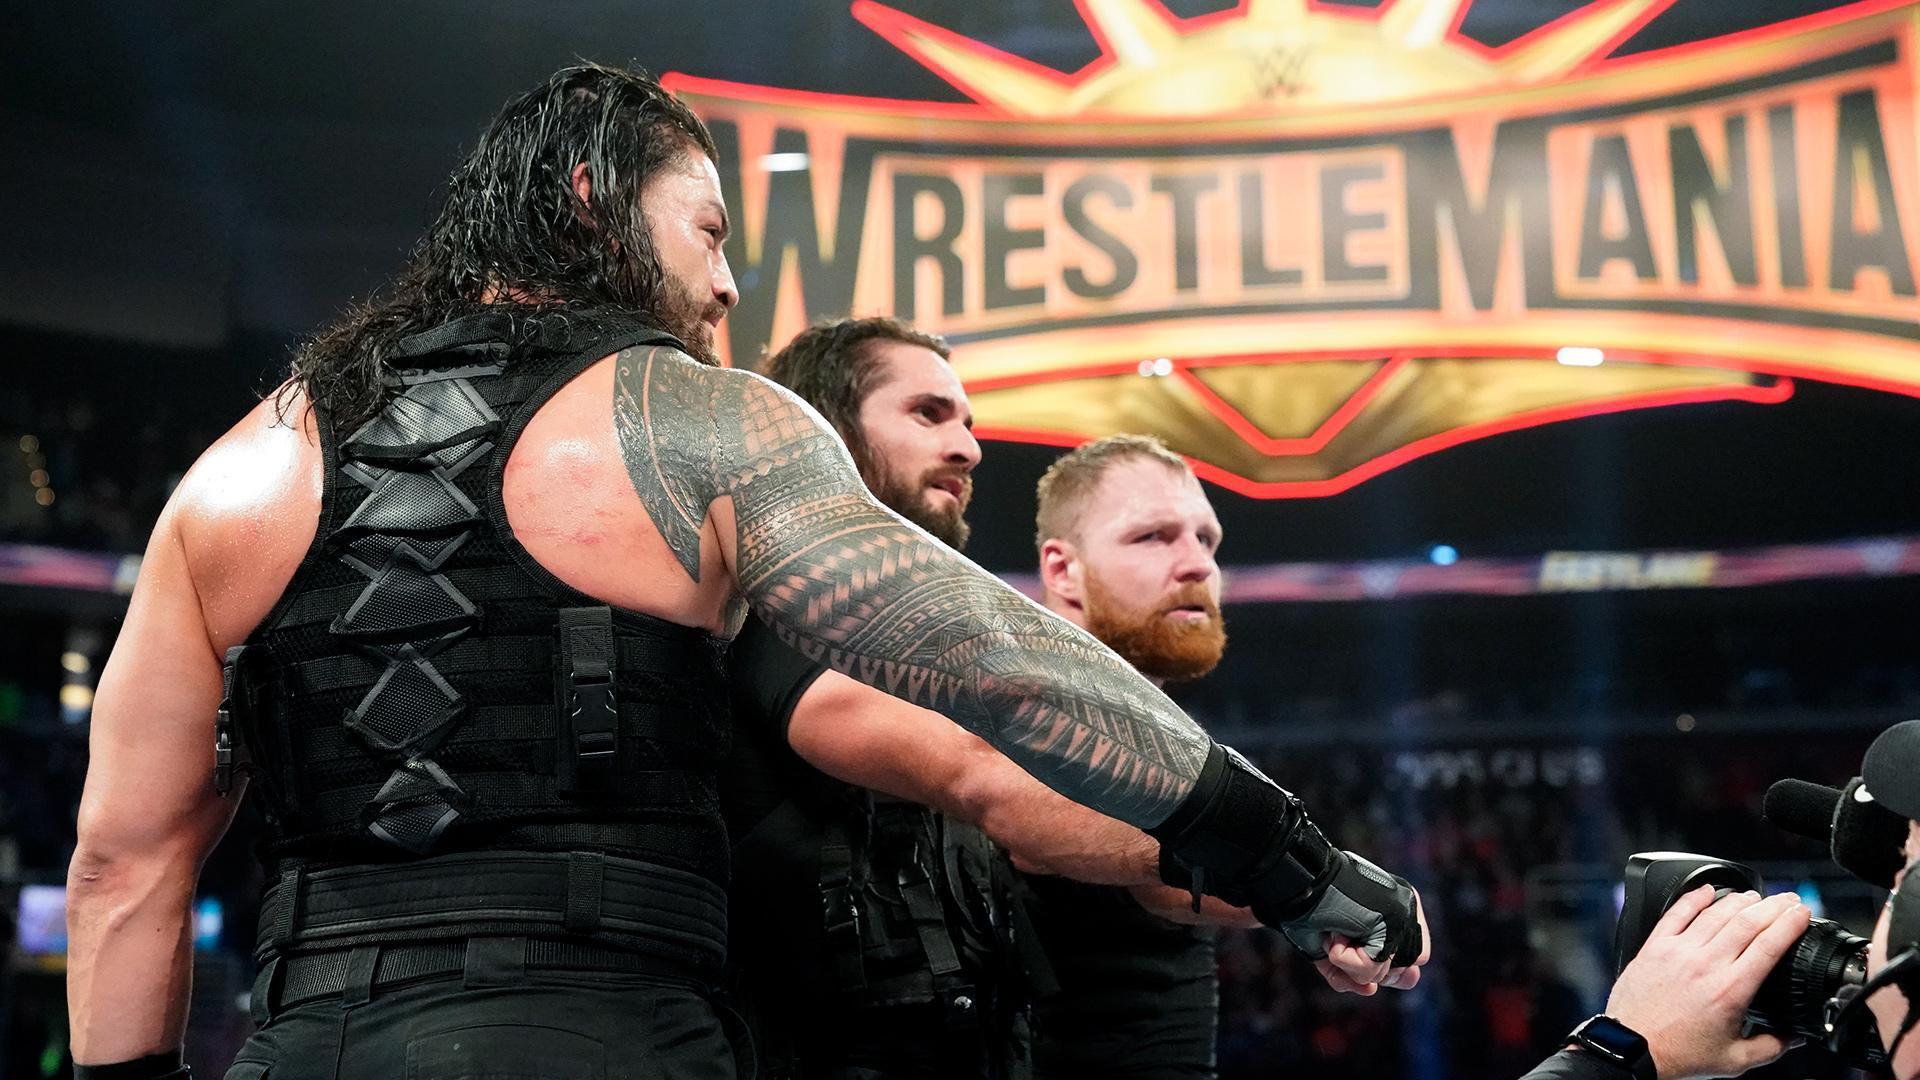 WWE Fastlane 2019: Full show match results and video highlights